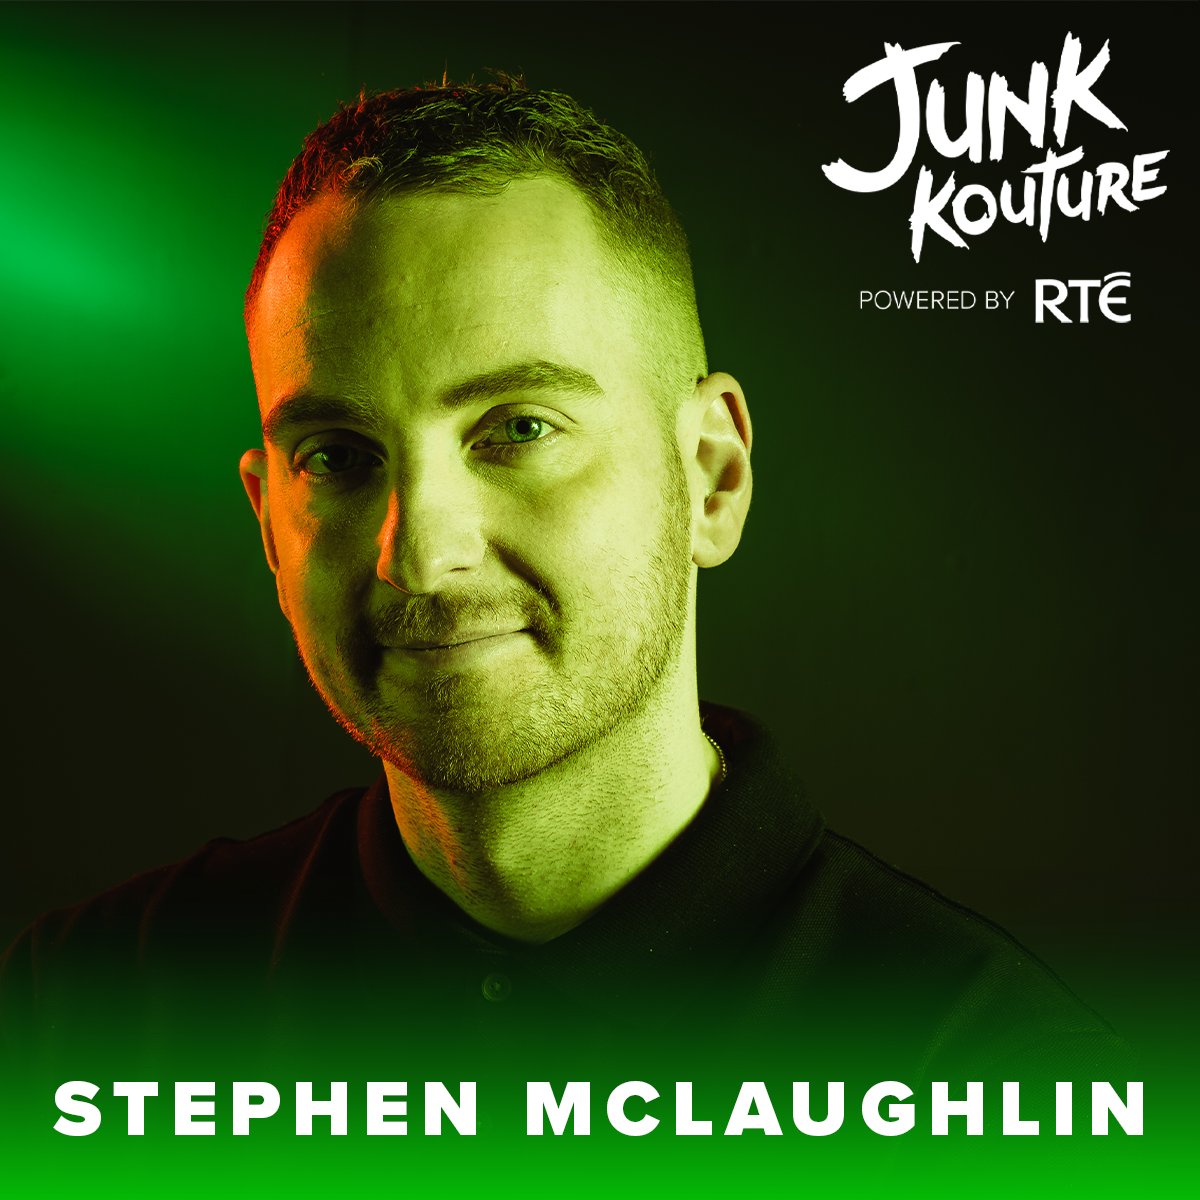 🔥 We are over the moon to have our JK alumni, Stephen McLaughlin of SML London, back again this year as a judge for our Dublin City Final powered by RTE. 🎫 Get your tickets now! ow.ly/inB250NTzsi @explore_rte